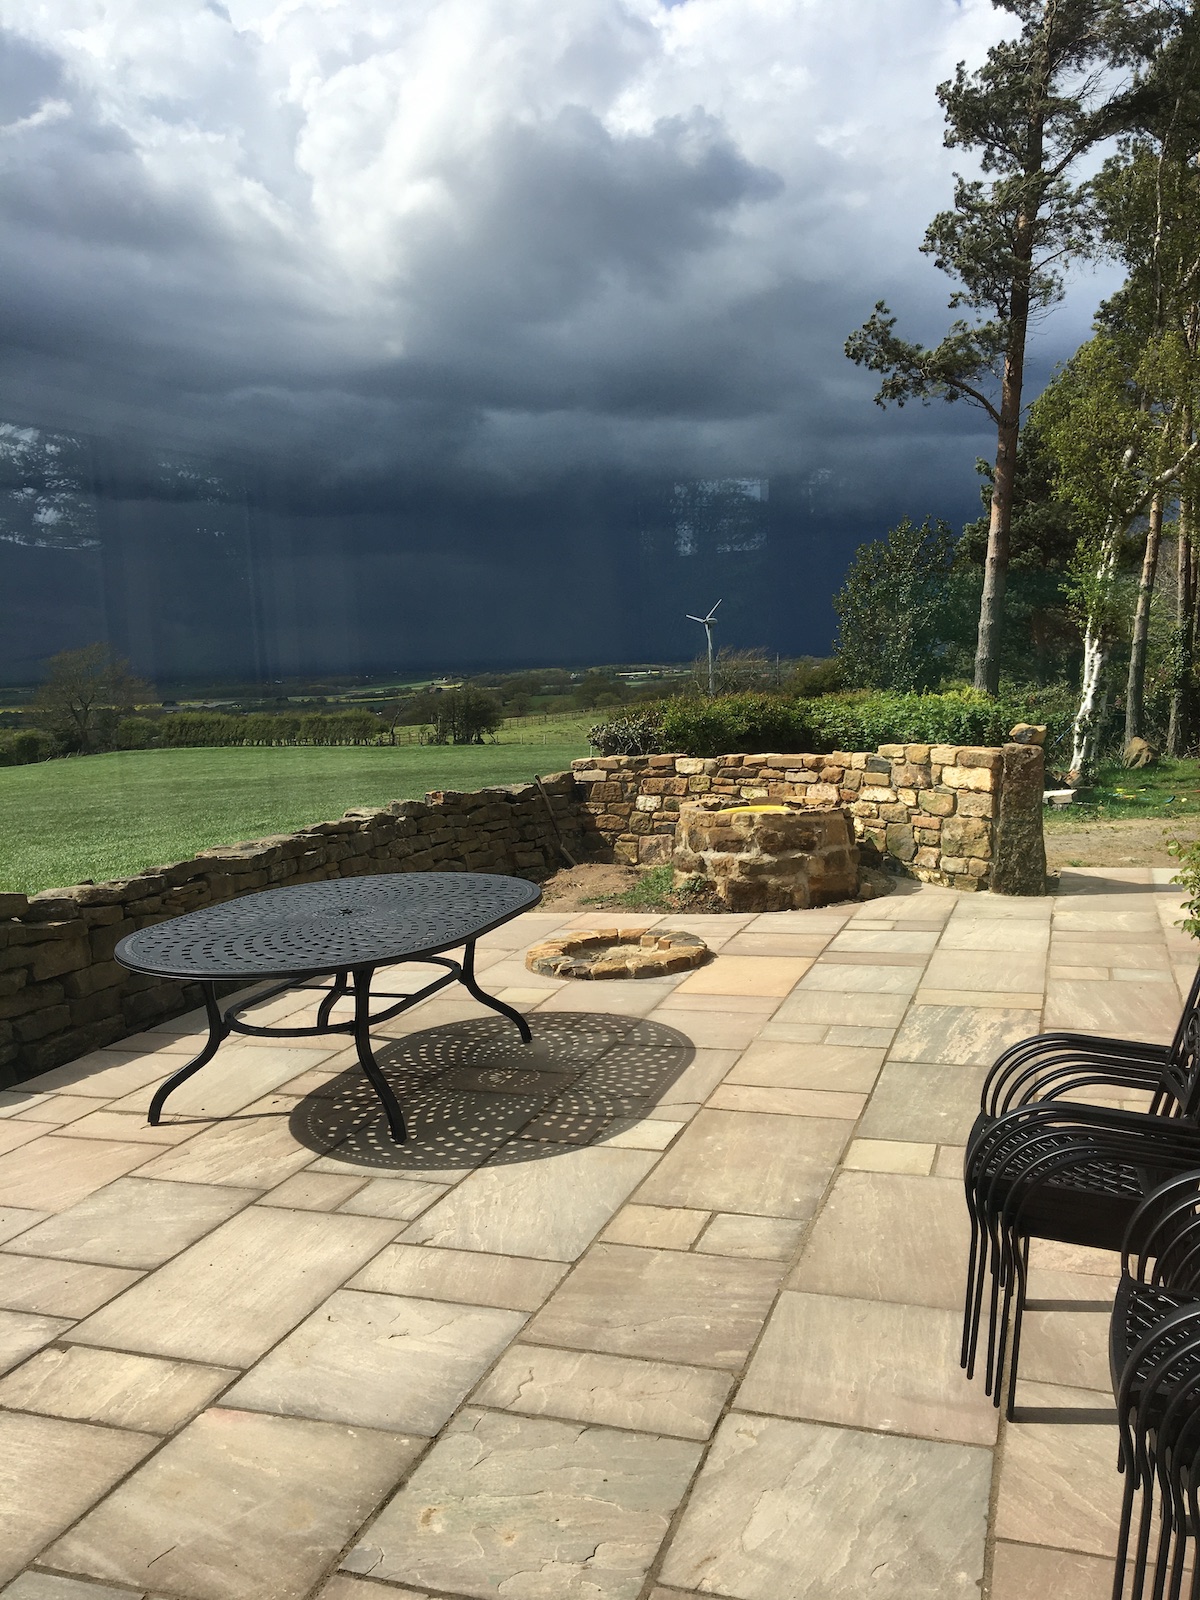 Move furniture off your patio in bad weather